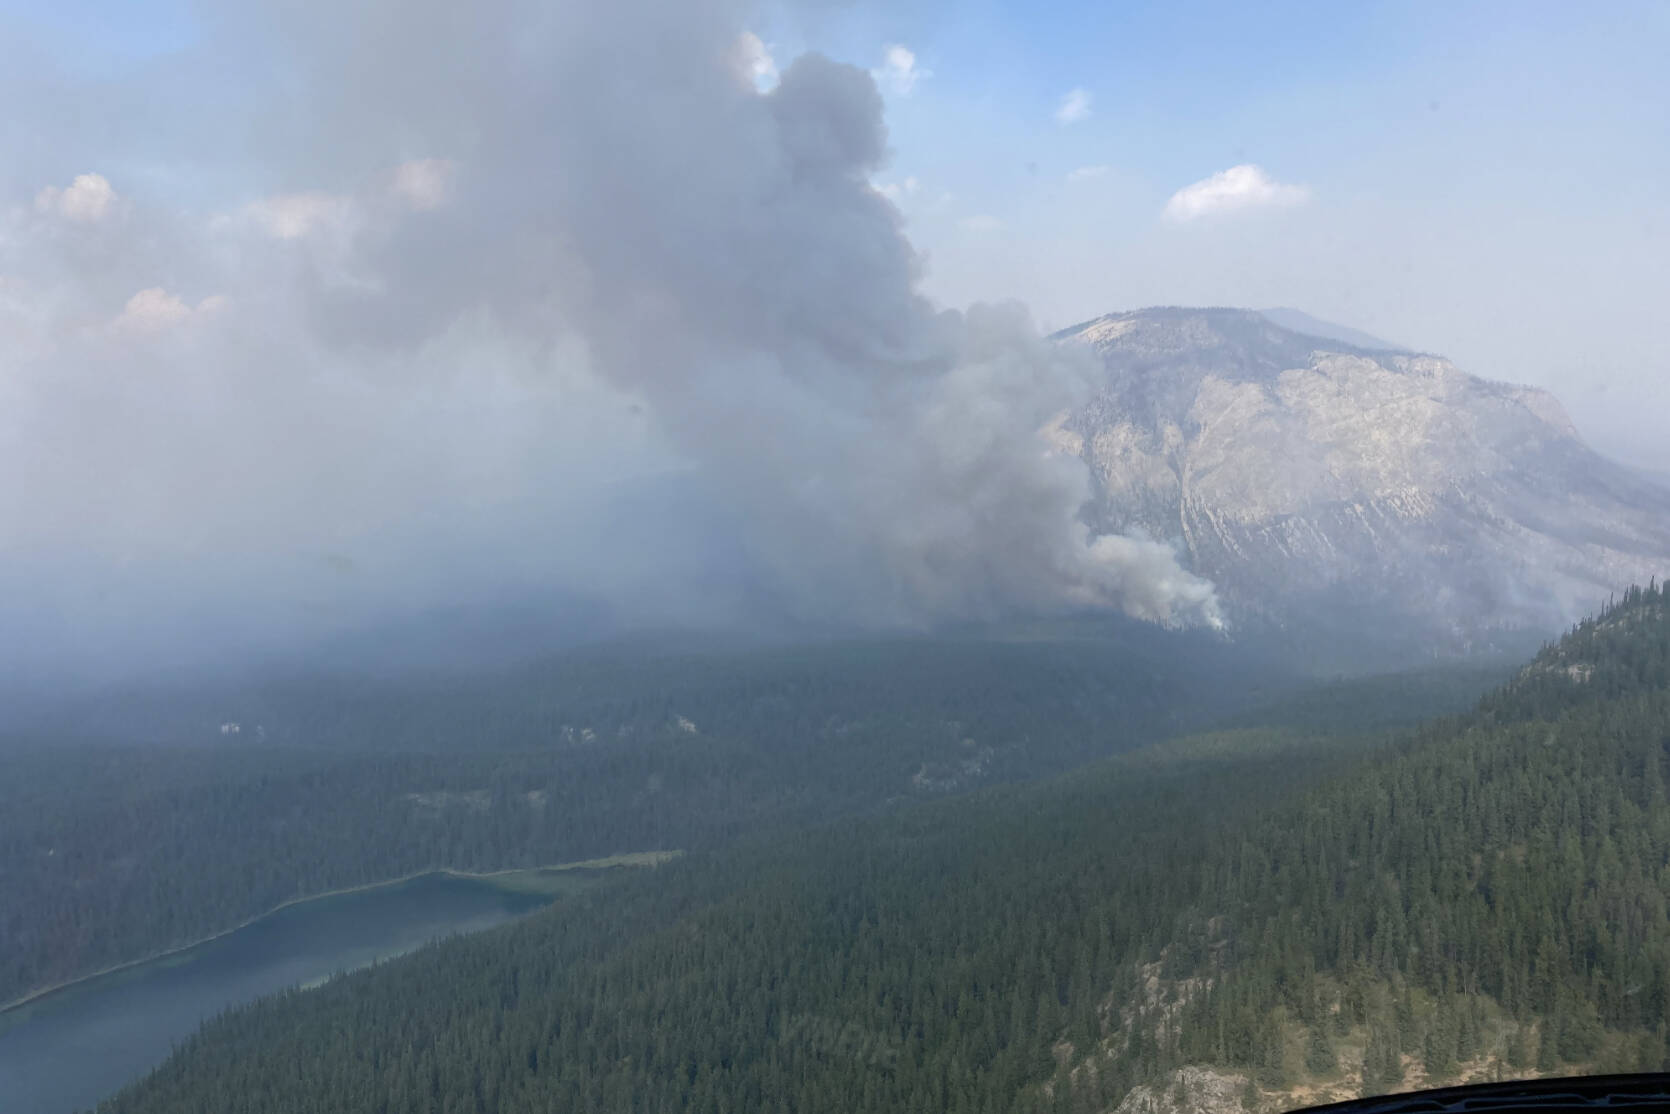 BC Wildfire Service said the Little Blue River wildfire is located west of Highway 37, approximately 40 kilometres north of Good Hope Lake and 40 kilometres south of the Yukon border. It is 36,501.8 hectares as of Aug. 25, and it was first discovered on July 26. (BC Wildfire Service)